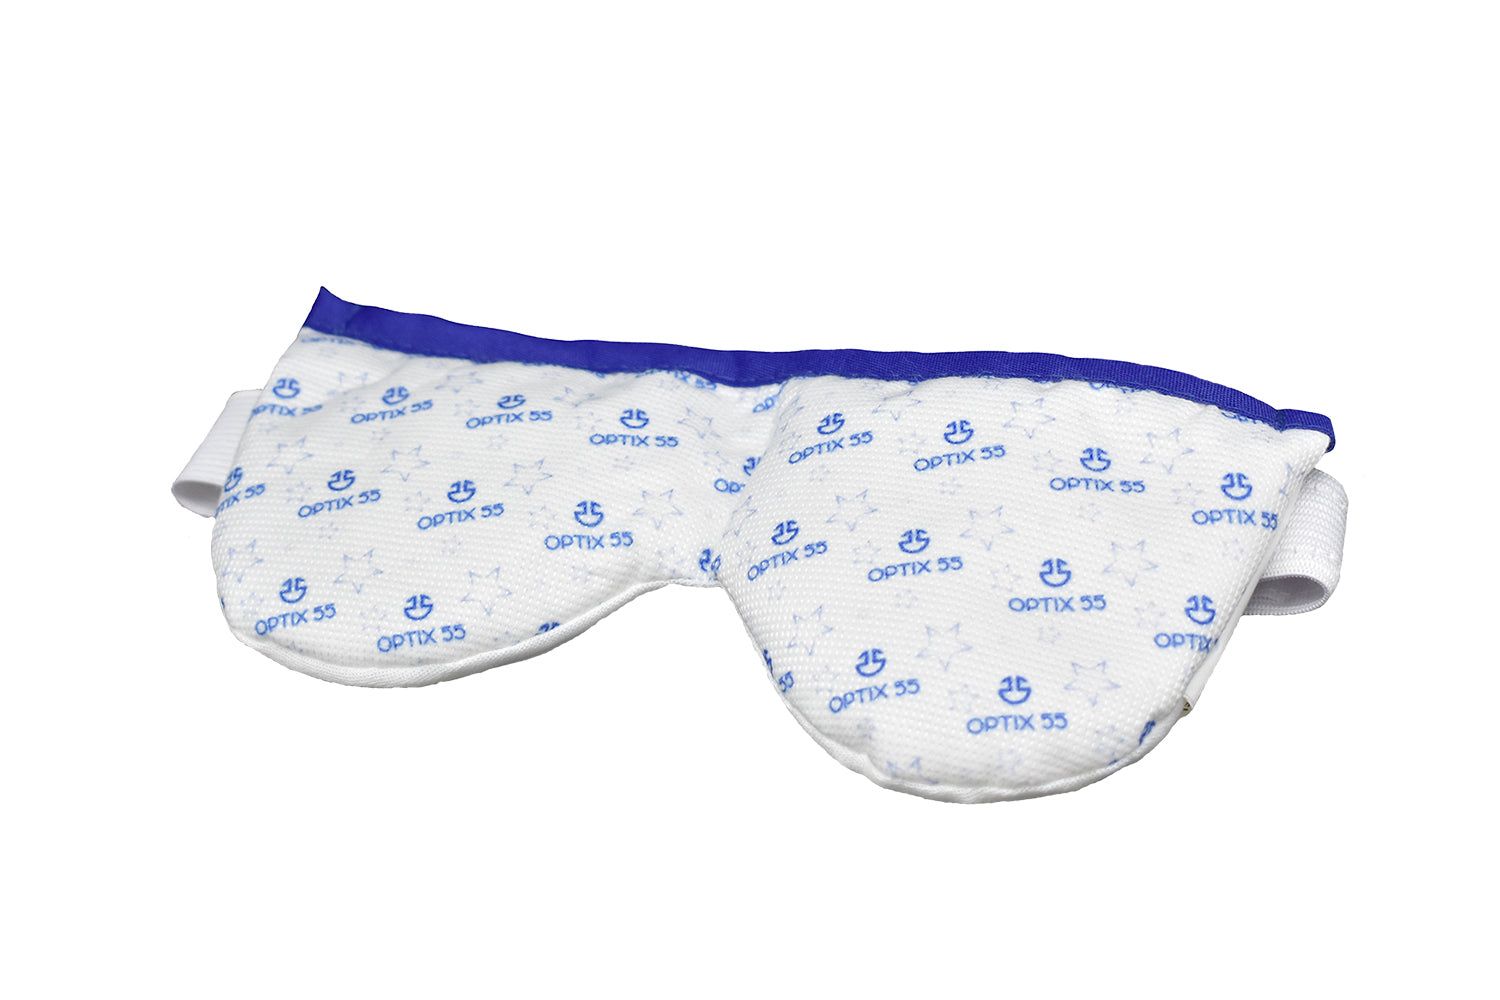 Eye Mask for Dry Eyes - Moist Heat Microwave Activated